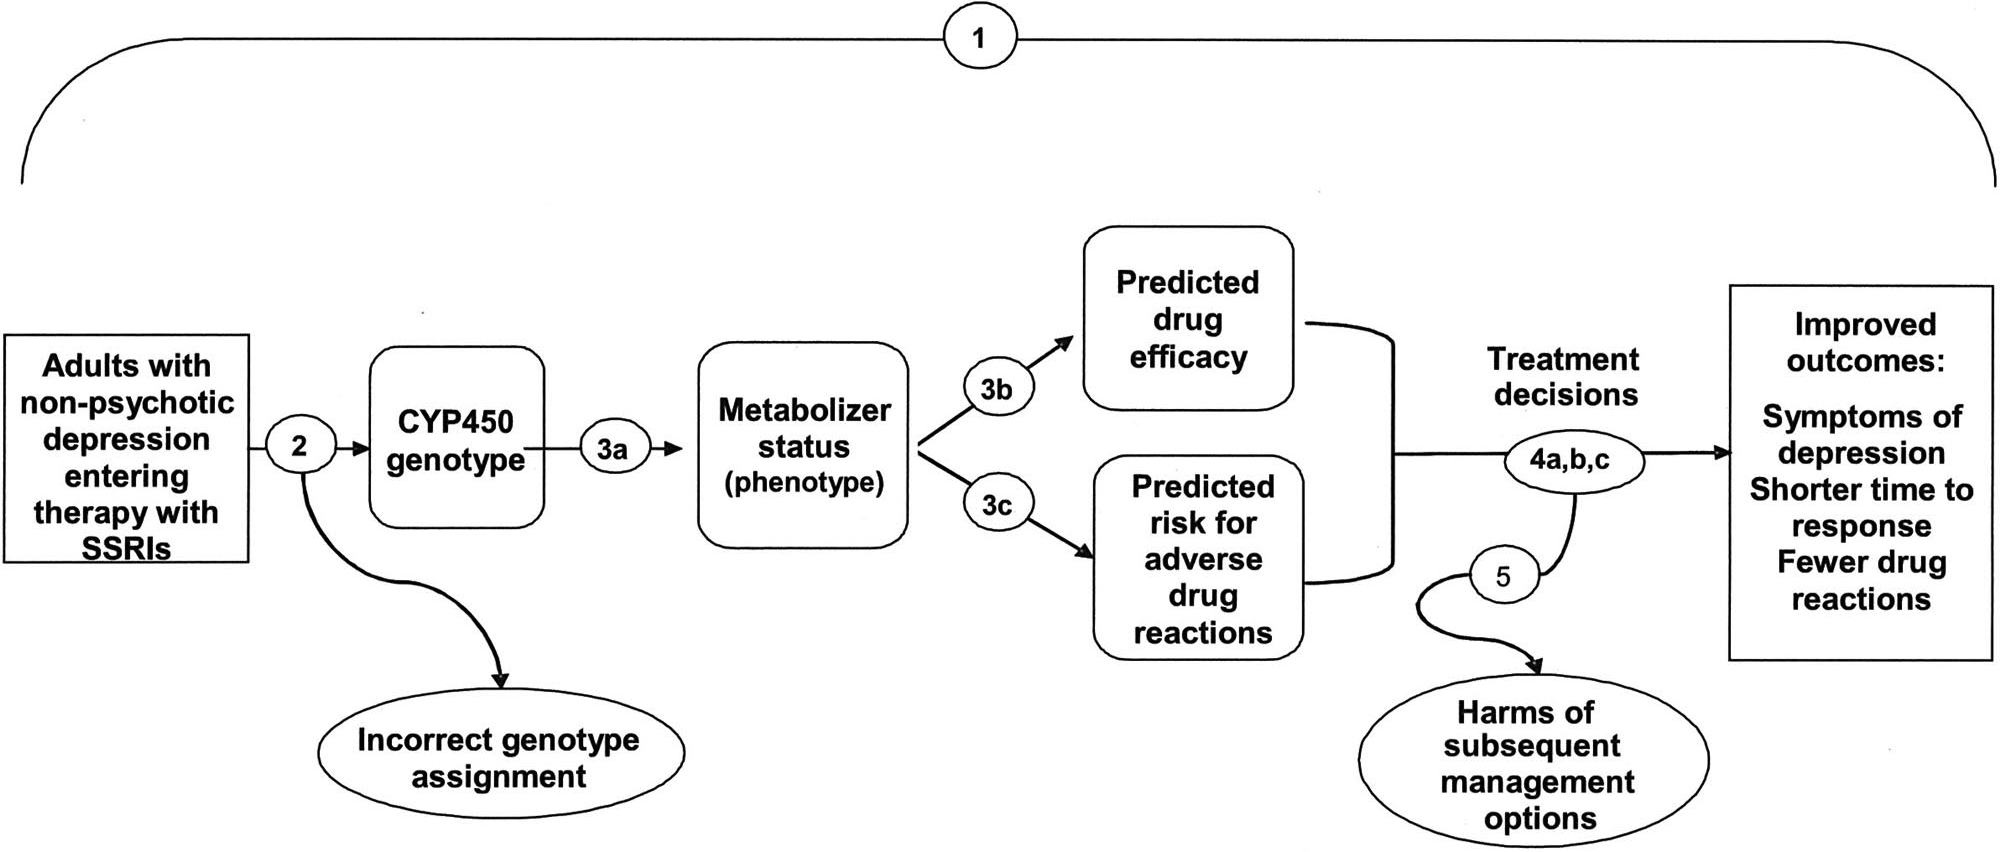 Box VI-4. Analytic Framework: CYP450 Genotype Testing for Selective Serotonin Reuptake Inhibitors.  The numbers above correspond to the following key questions: 1. Overarching question: Does testing for cytochrome P450  <em>(CYP450)</em>  polymorphisms in adults entering selective serotonin reuptake inhibitor (SSRI) treatment for nonpsychotic depression lead to improvement in outcomes, or are testing results useful in medical, personal, or public health decision-making?
2. What is the analytic validity of tests that identify key  <em>CYP450</em>  polymorphisms? 3. Clinical validity:  a: How well do particular  <em>CYP450</em>  genotypes predict metabolism of particular SSRIs? b: How well does  <em>CYP450</em>  testing predict drug efficacy? c: Do factors such as race/ethnicity, diet, or other medications, affect these associations? 
4. Clinical utility:  a: Does  <em>CYP450</em>  testing influence depression management decisions by patients and providers in ways that could improve or worsen outcomes? b: Does the identification of the  <em>CYP450</em>  genotypes in adults entering SSRI treatment for nonpsychotic depression lead to improved clinical outcomes compared to not testing? c: Are the testing results useful in medical, personal, or public health decision-making?
5. What are the harms associated with testing for  <em>CYP450</em>  polymorphisms and subsequent management options? 
